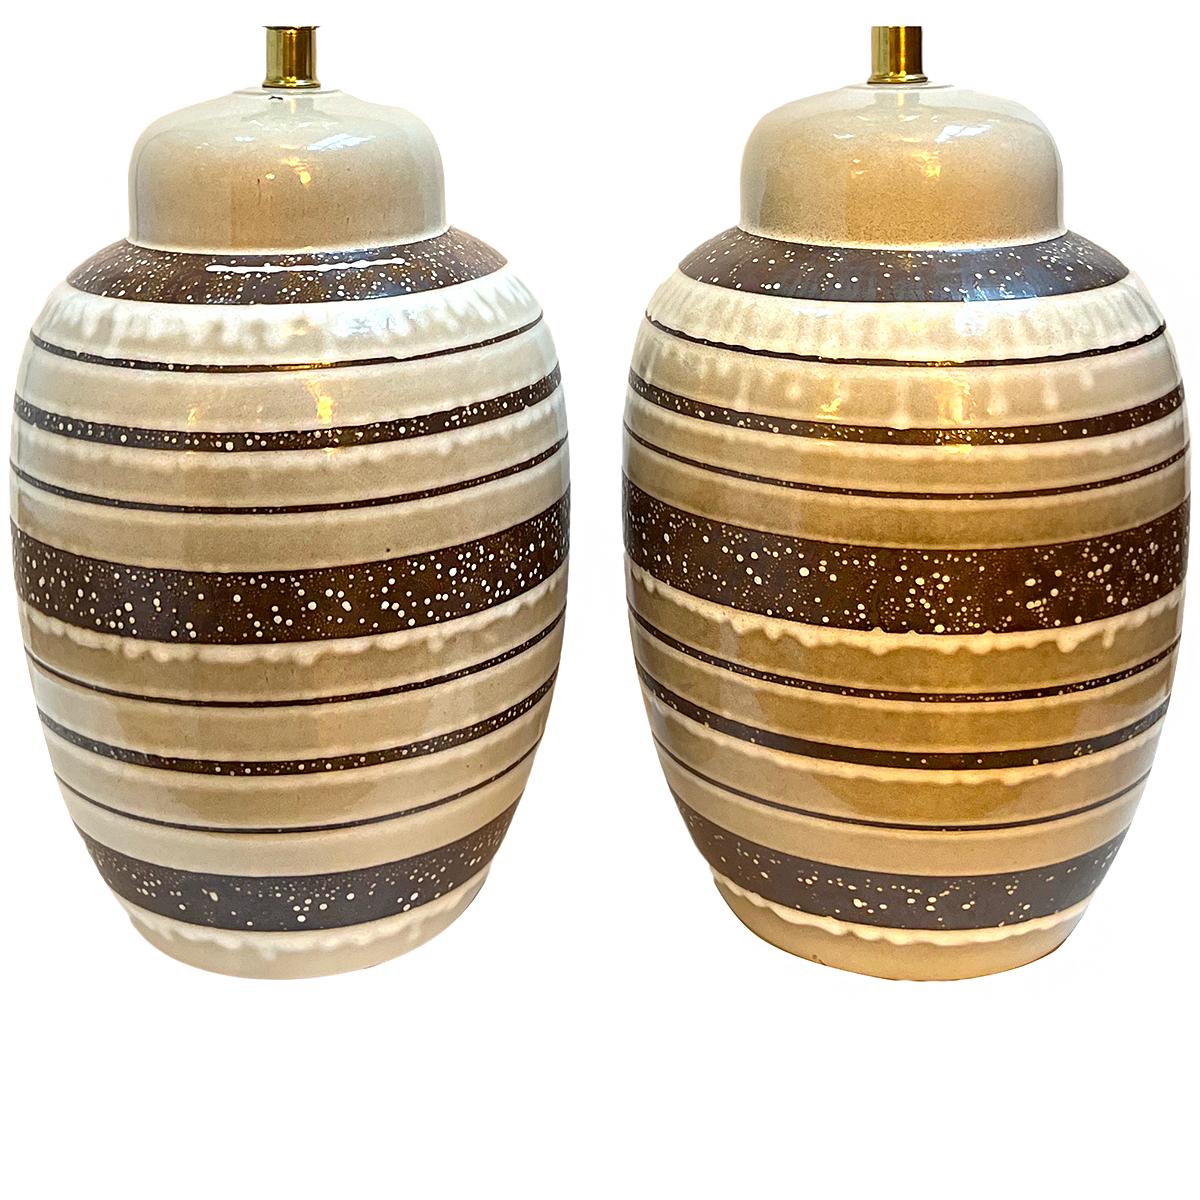 Pair of circa 1960's Italian striped table lamps.

Measurements:
Height of body: 15.5